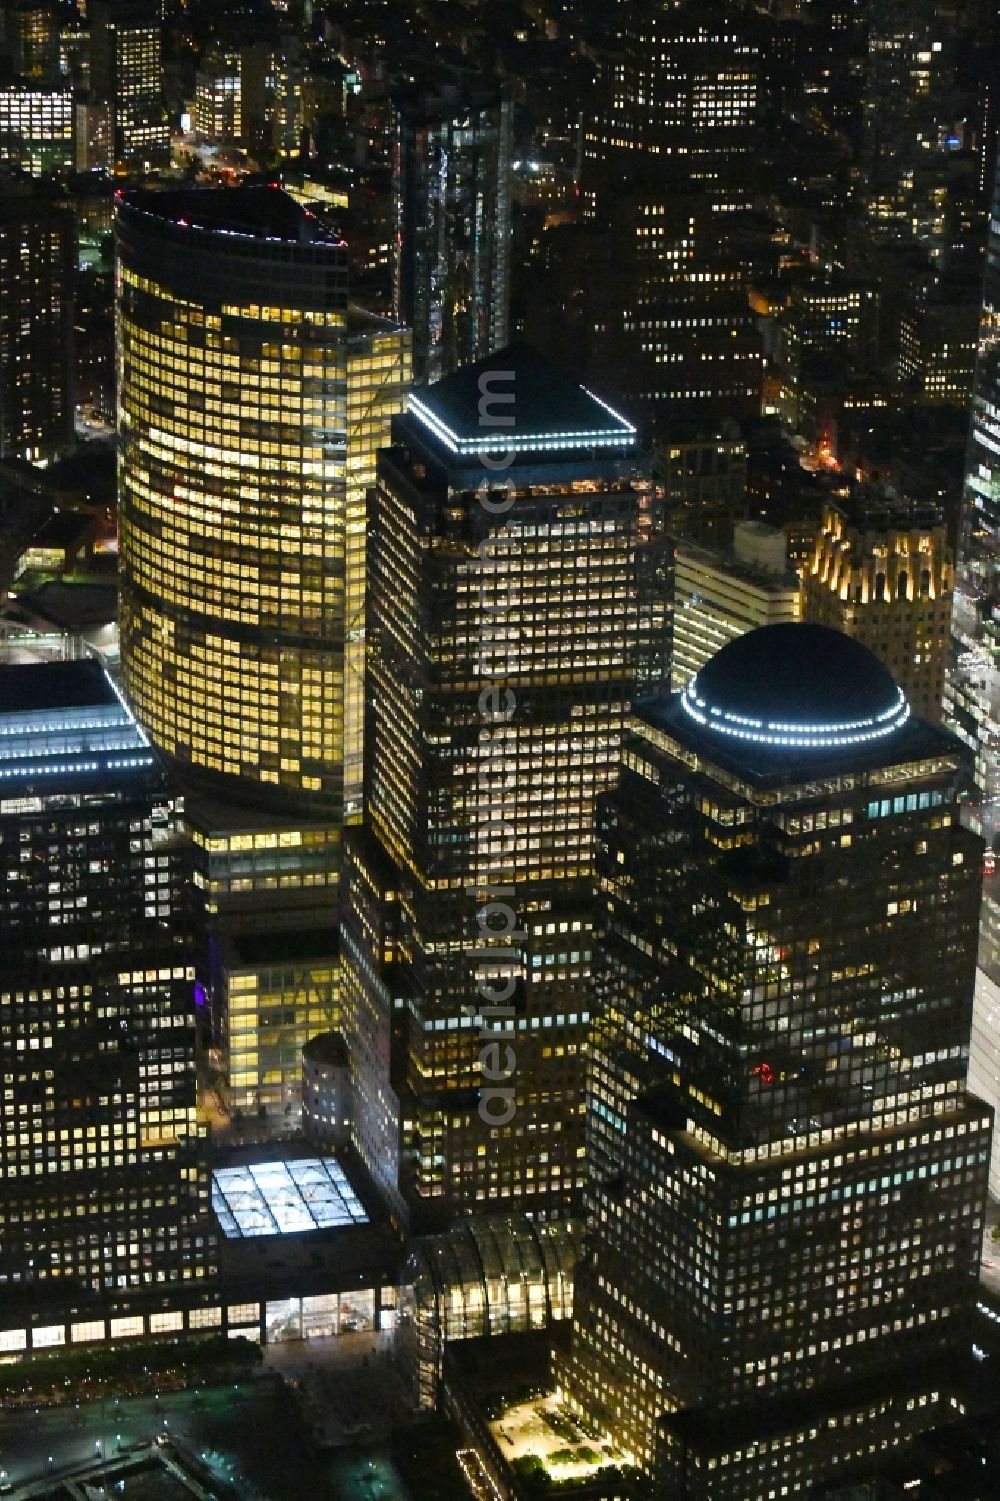 New York at night from above - Night lighting High-rise ensemble of West St - Brookfield Place in the district Manhattan in New York in United States of America